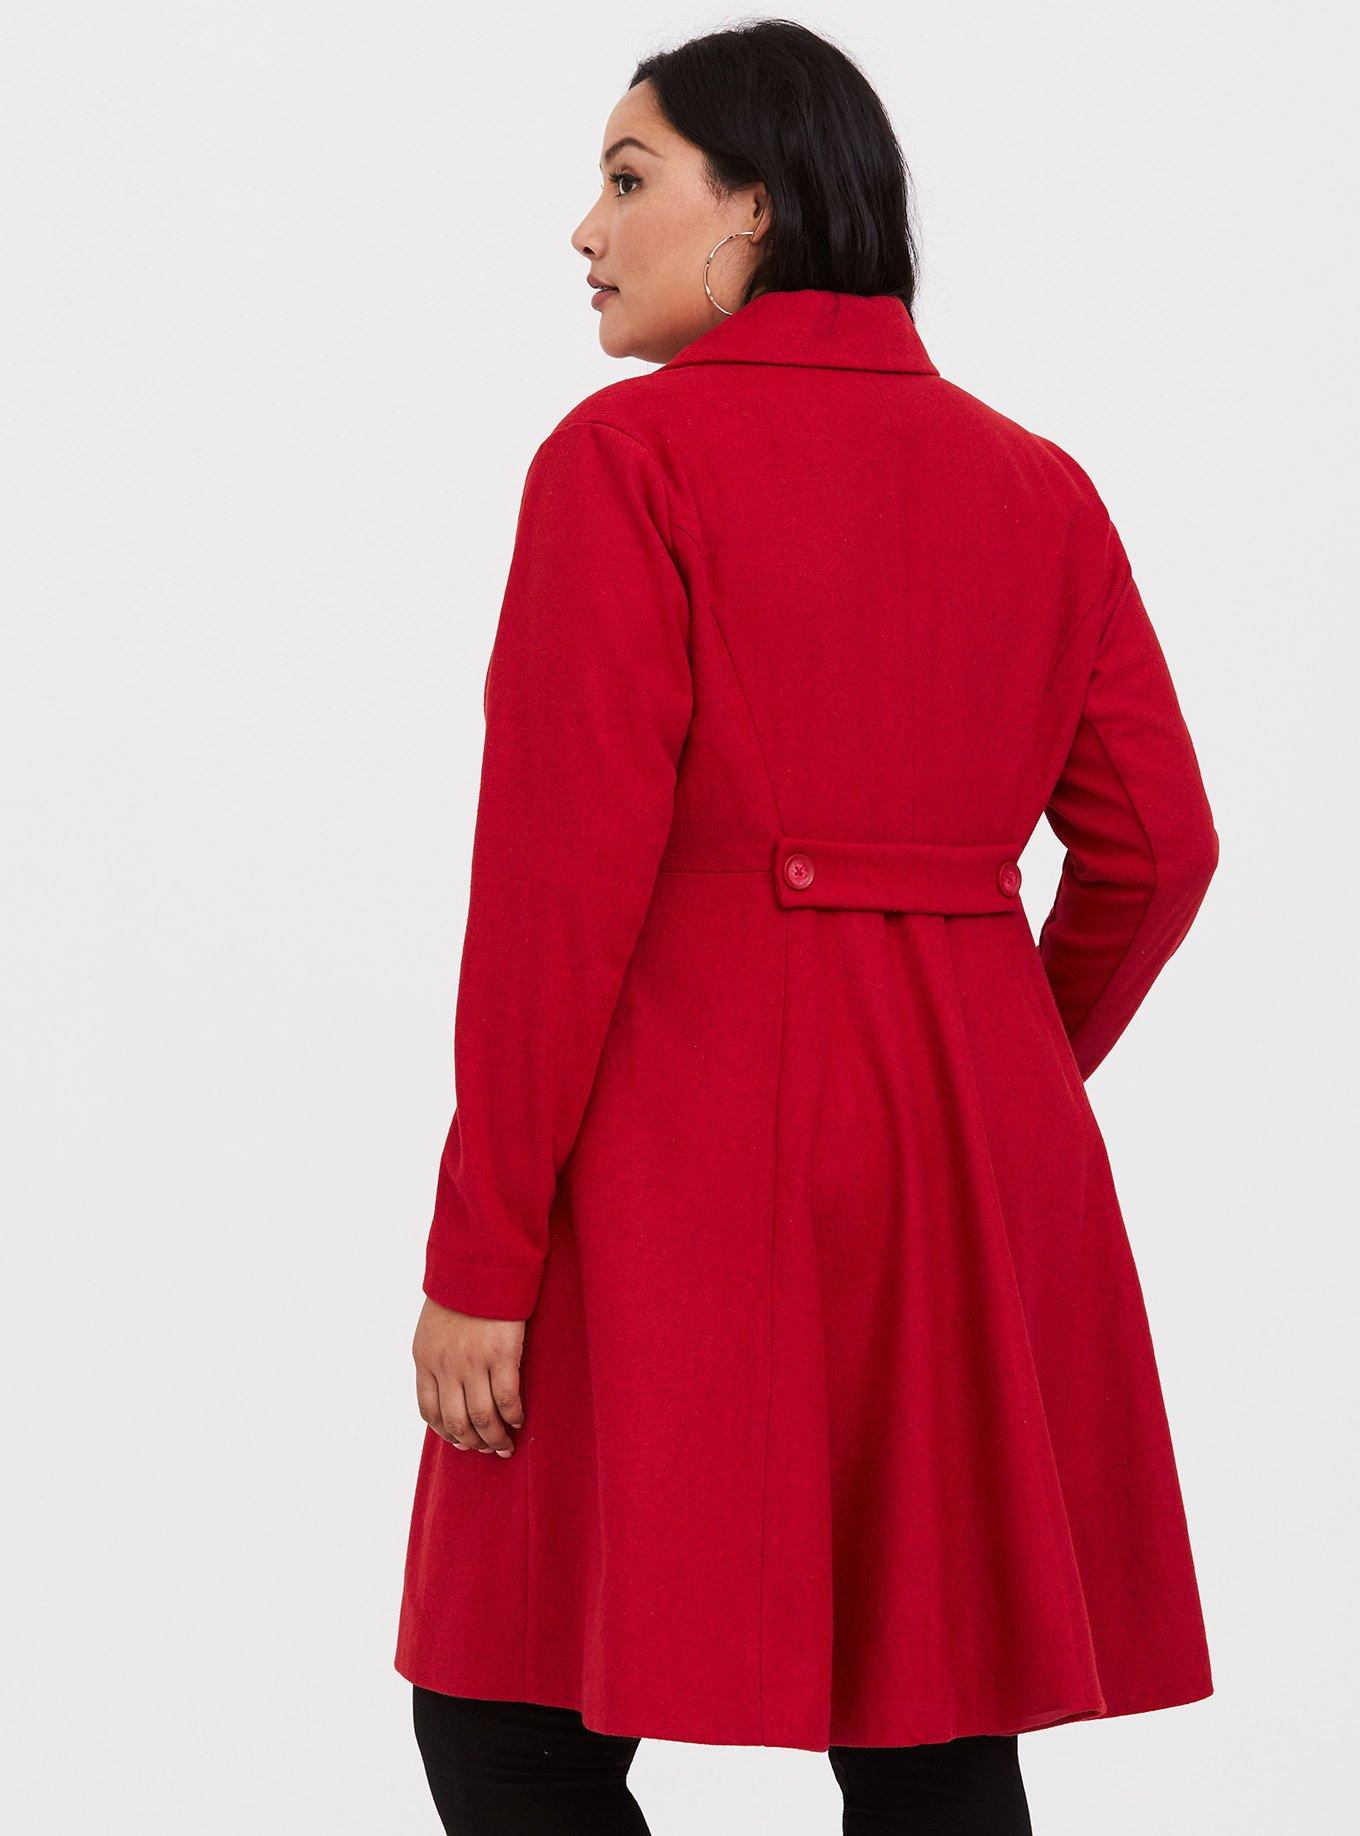 Plus Size Fit and Flare Coats - The Untidy Closet  Fit and flare coat,  Flattering plus size dresses, Plus size winter outfits